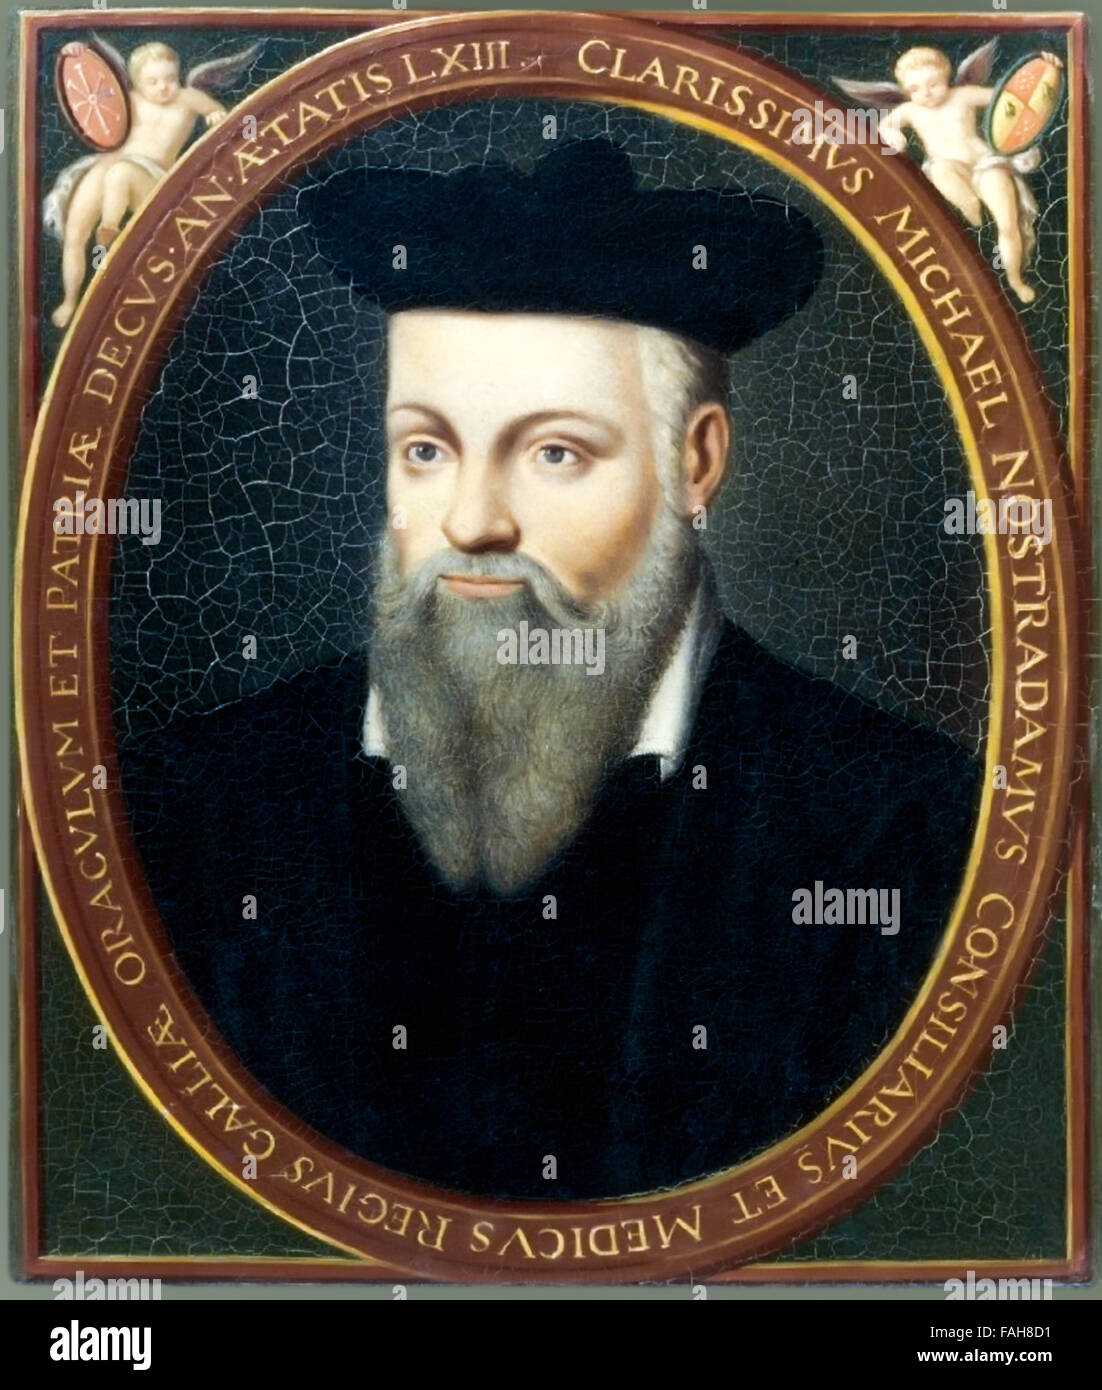 Nostradamus (1503-1566), oil painting portrait based on one painted by his son César de Nostredame (1553-1630) completed circa 1610, artist unknown. Stock Photo